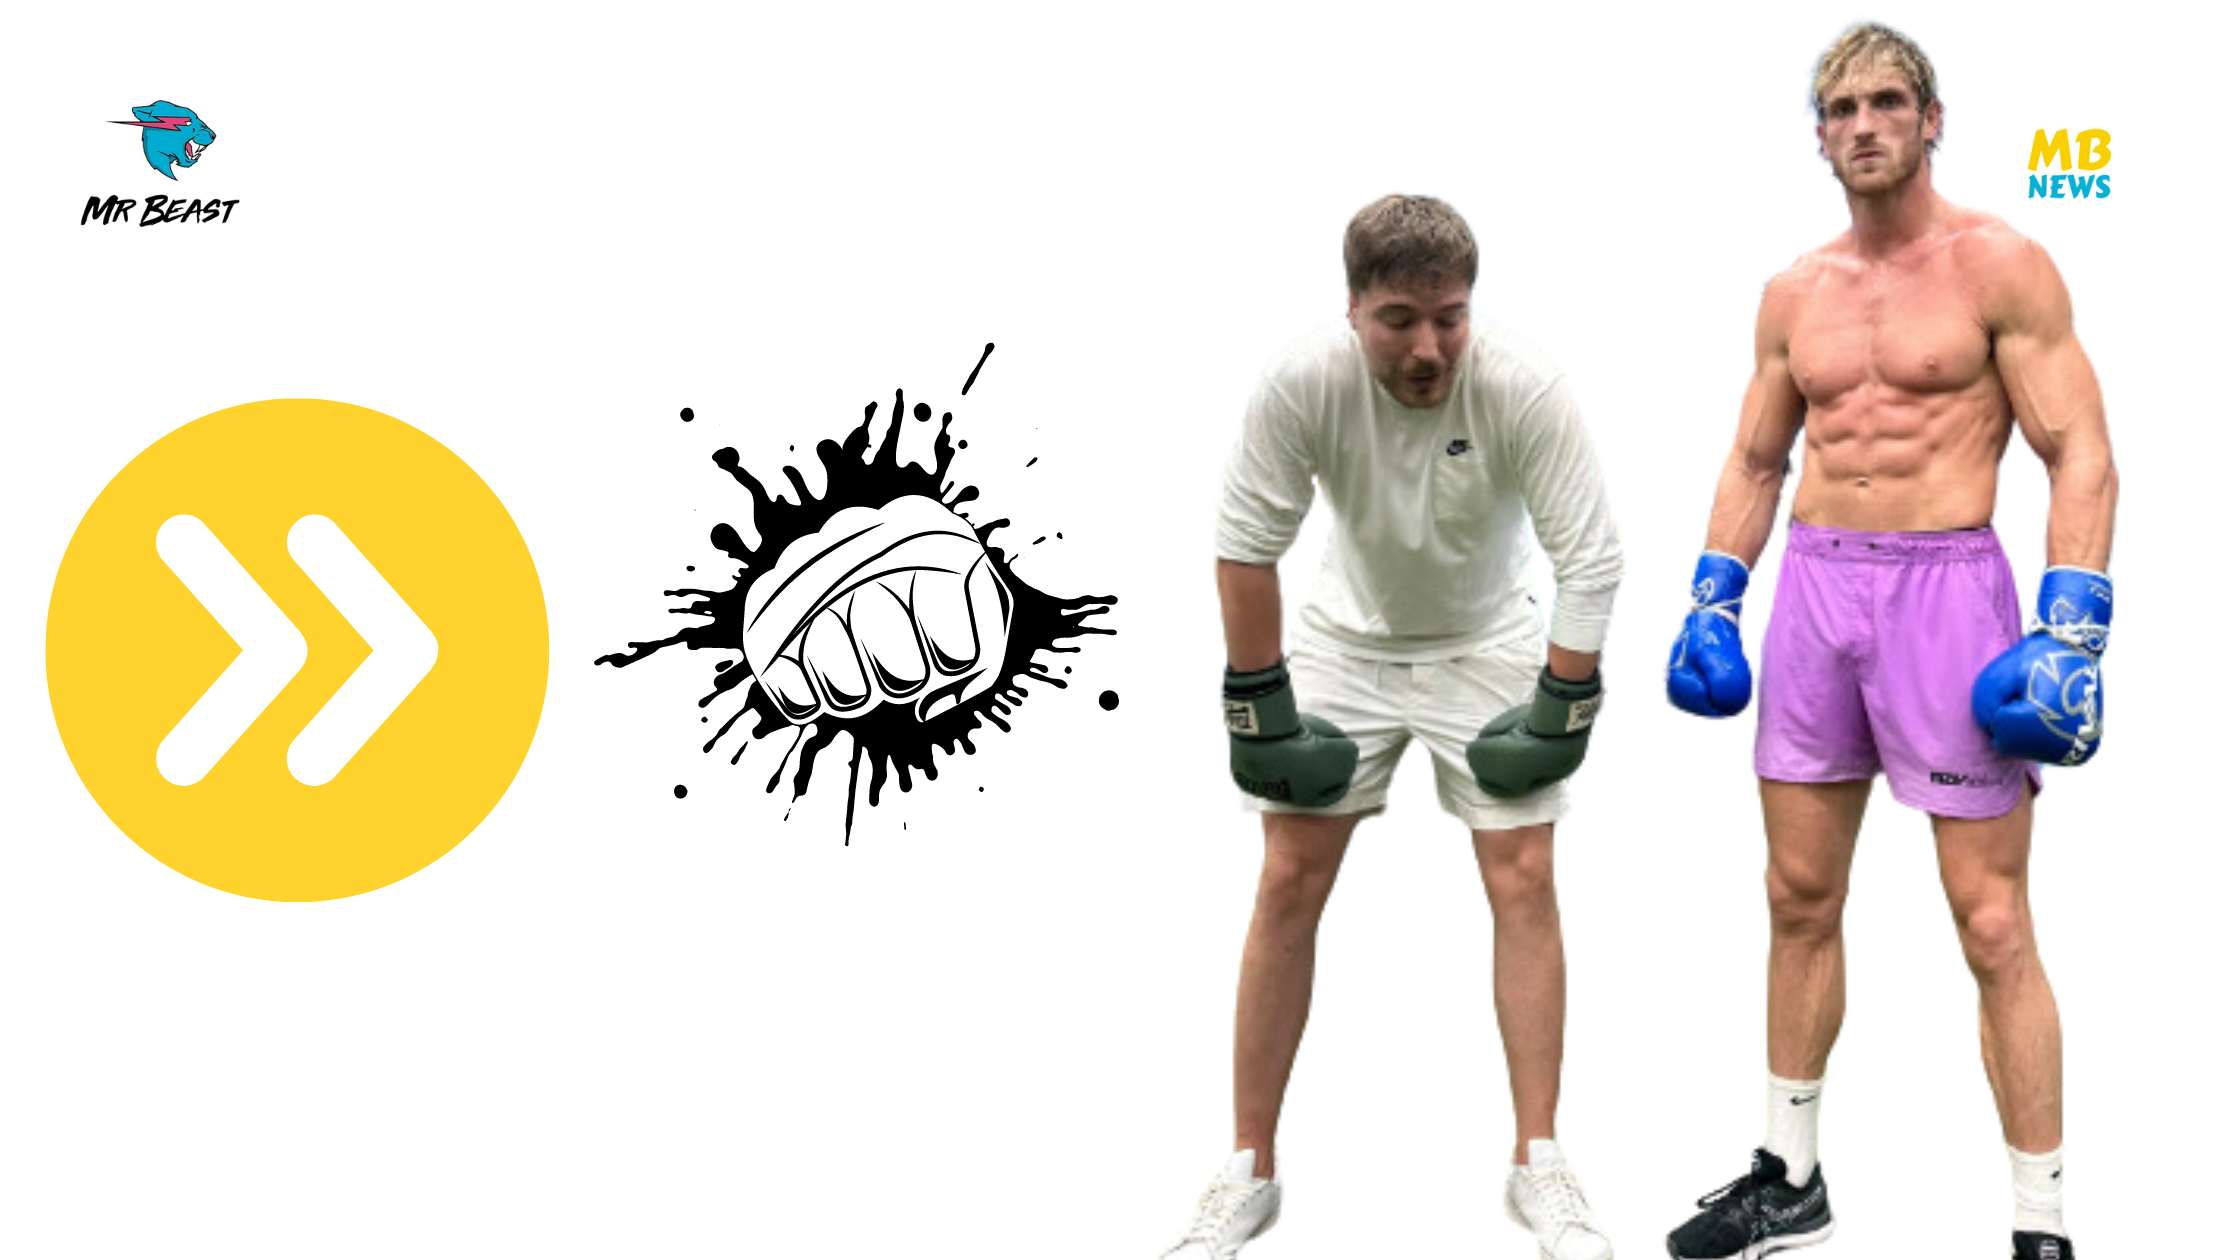 Logan Paul Joins Forces with MrBeast for Intense Boxing Training: What's Next for the Dynamic Duo?